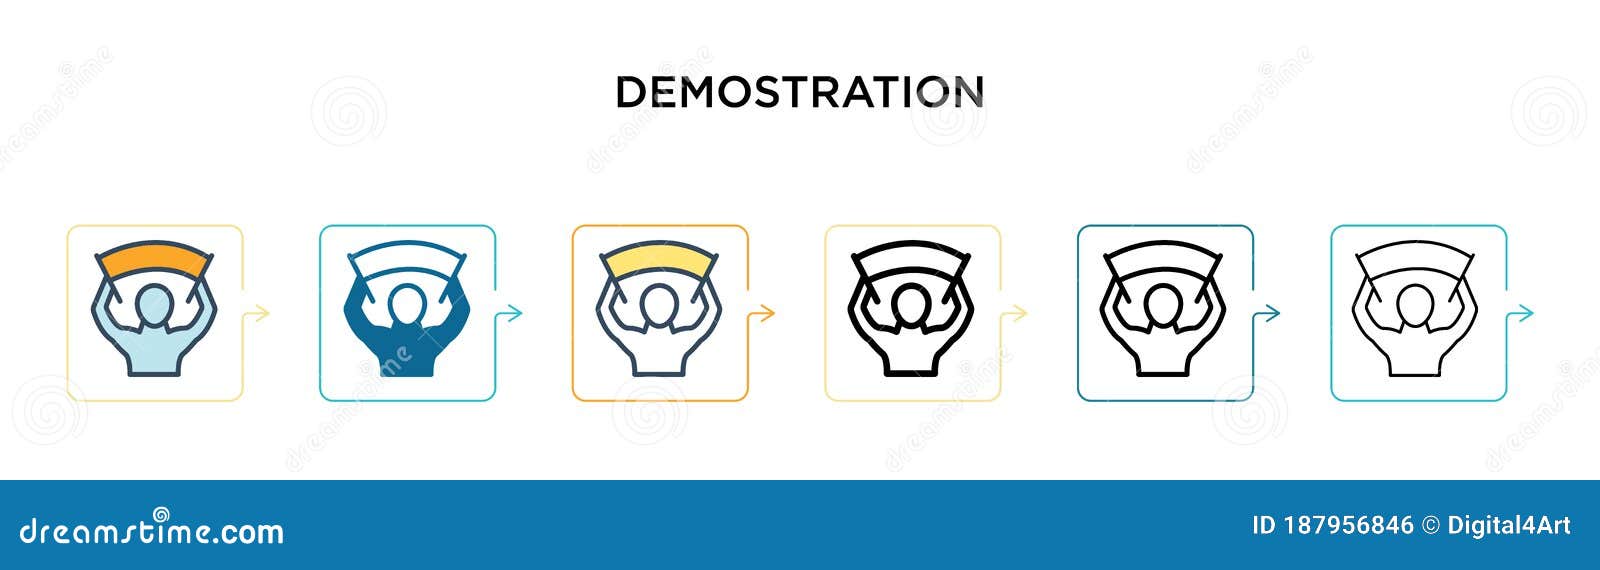 demostration  icon in 6 different modern styles. black, two colored demostration icons ed in filled, outline, line and